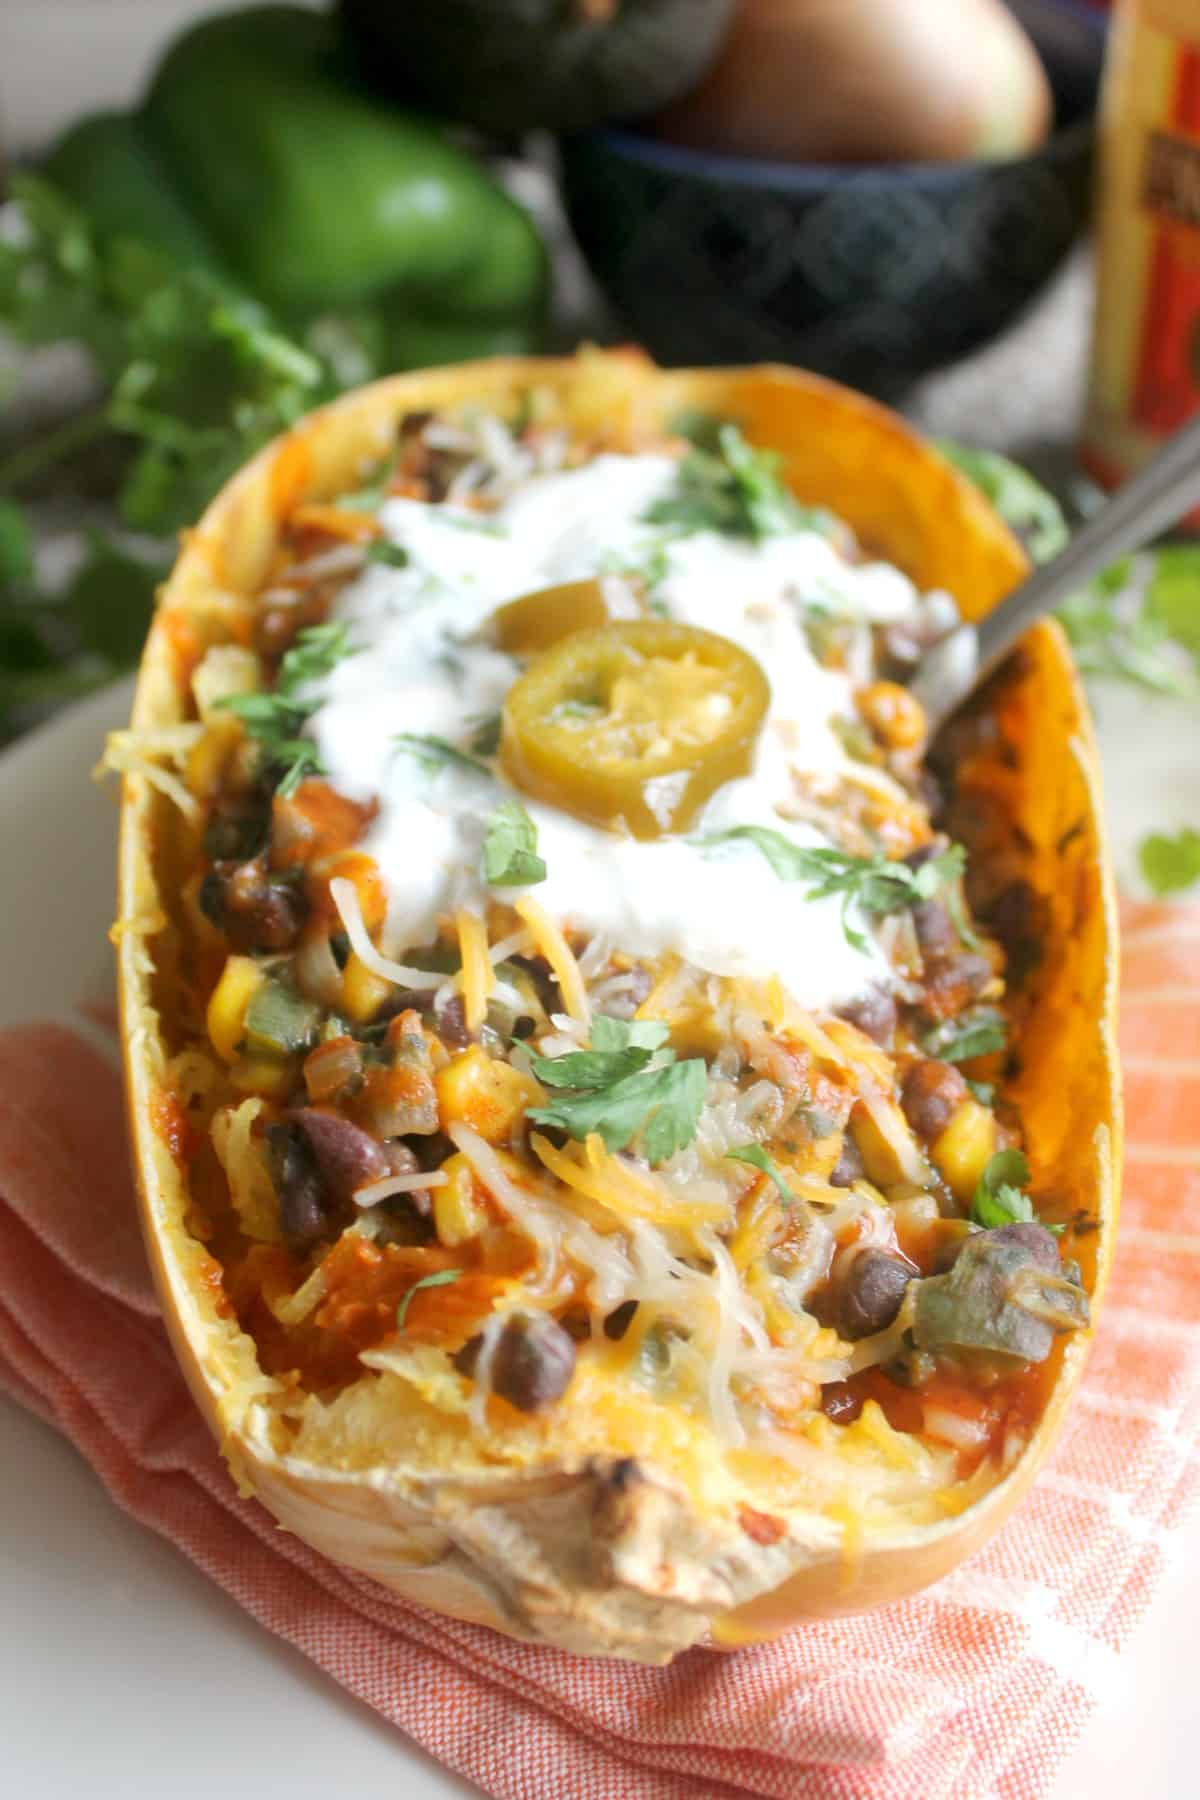 Veggie Enchilada Bowls make a smart choice any day! Serve "filling" atop spaghetti squash, baked sweet potato, rice or quinoa for a filling, flavorful meal!